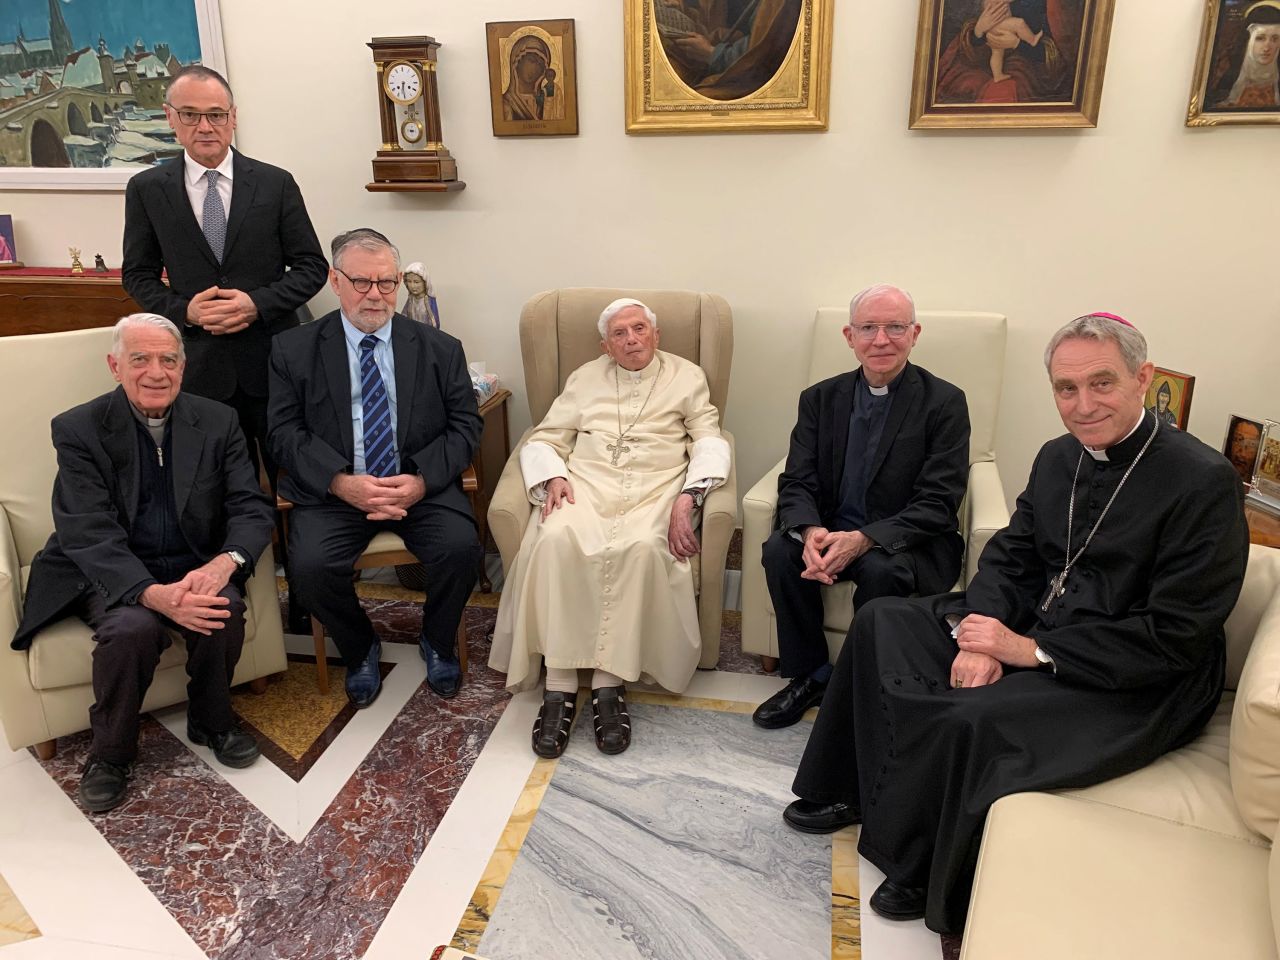 Benedict receives the winners of the Ratzinger Prize in December 2022. The award is given to scholars that have stood out for their scientific research in the field of theology.